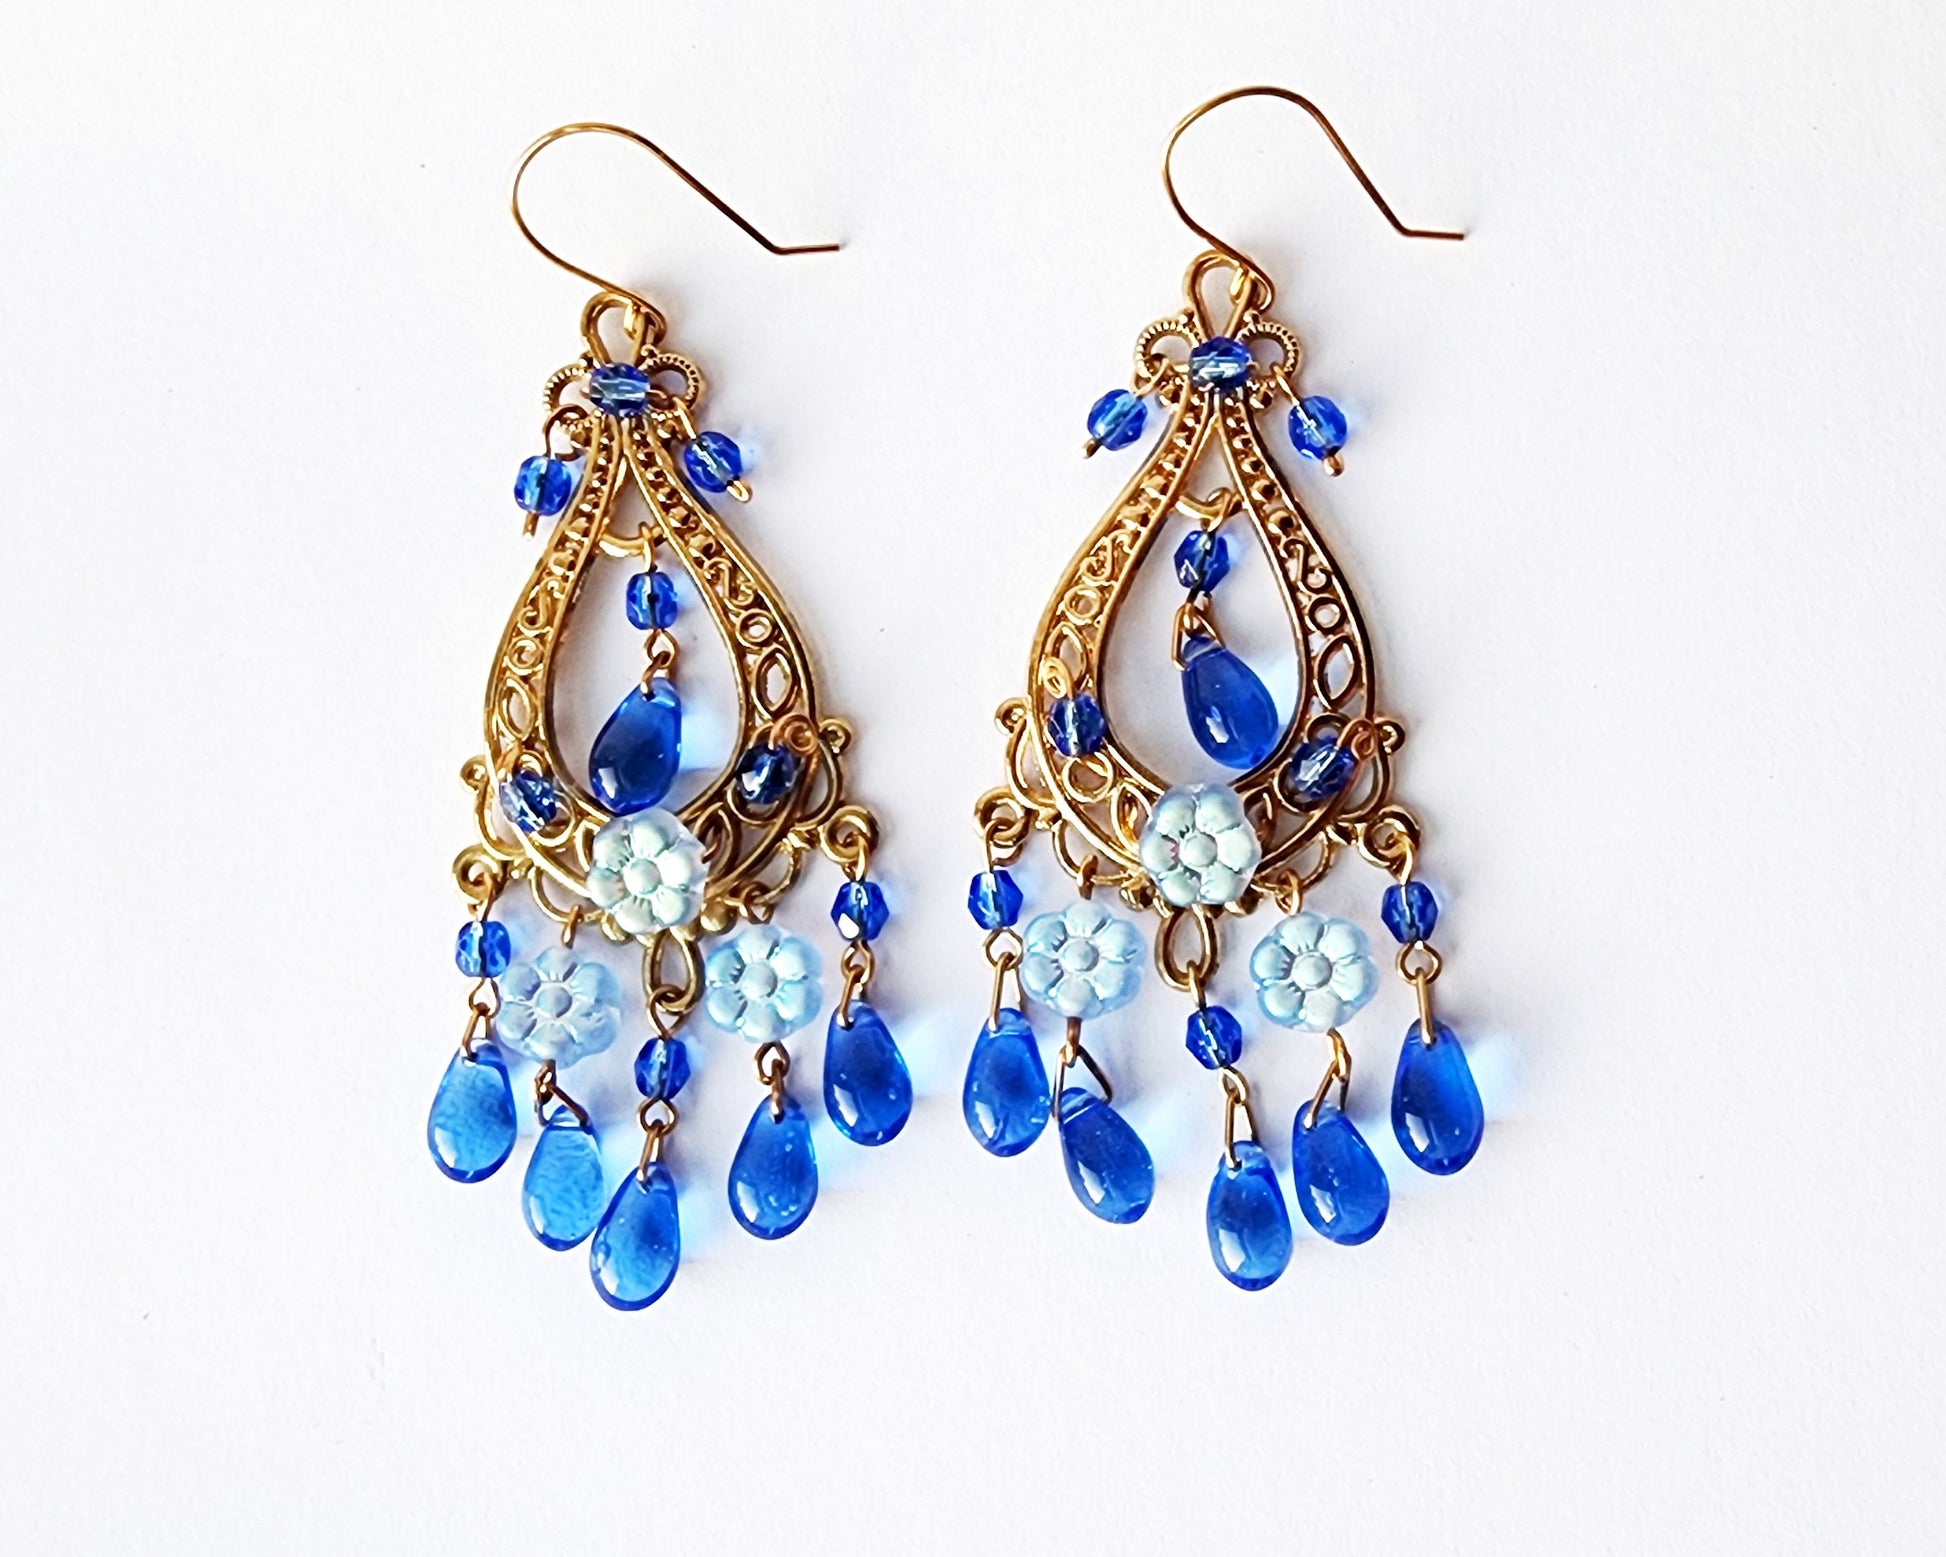 Long Eco Blue Floral Chandelier Earrings, large gold design with sapphire blue glass dangles and lighter blue flowers, on French style earrings wires. 